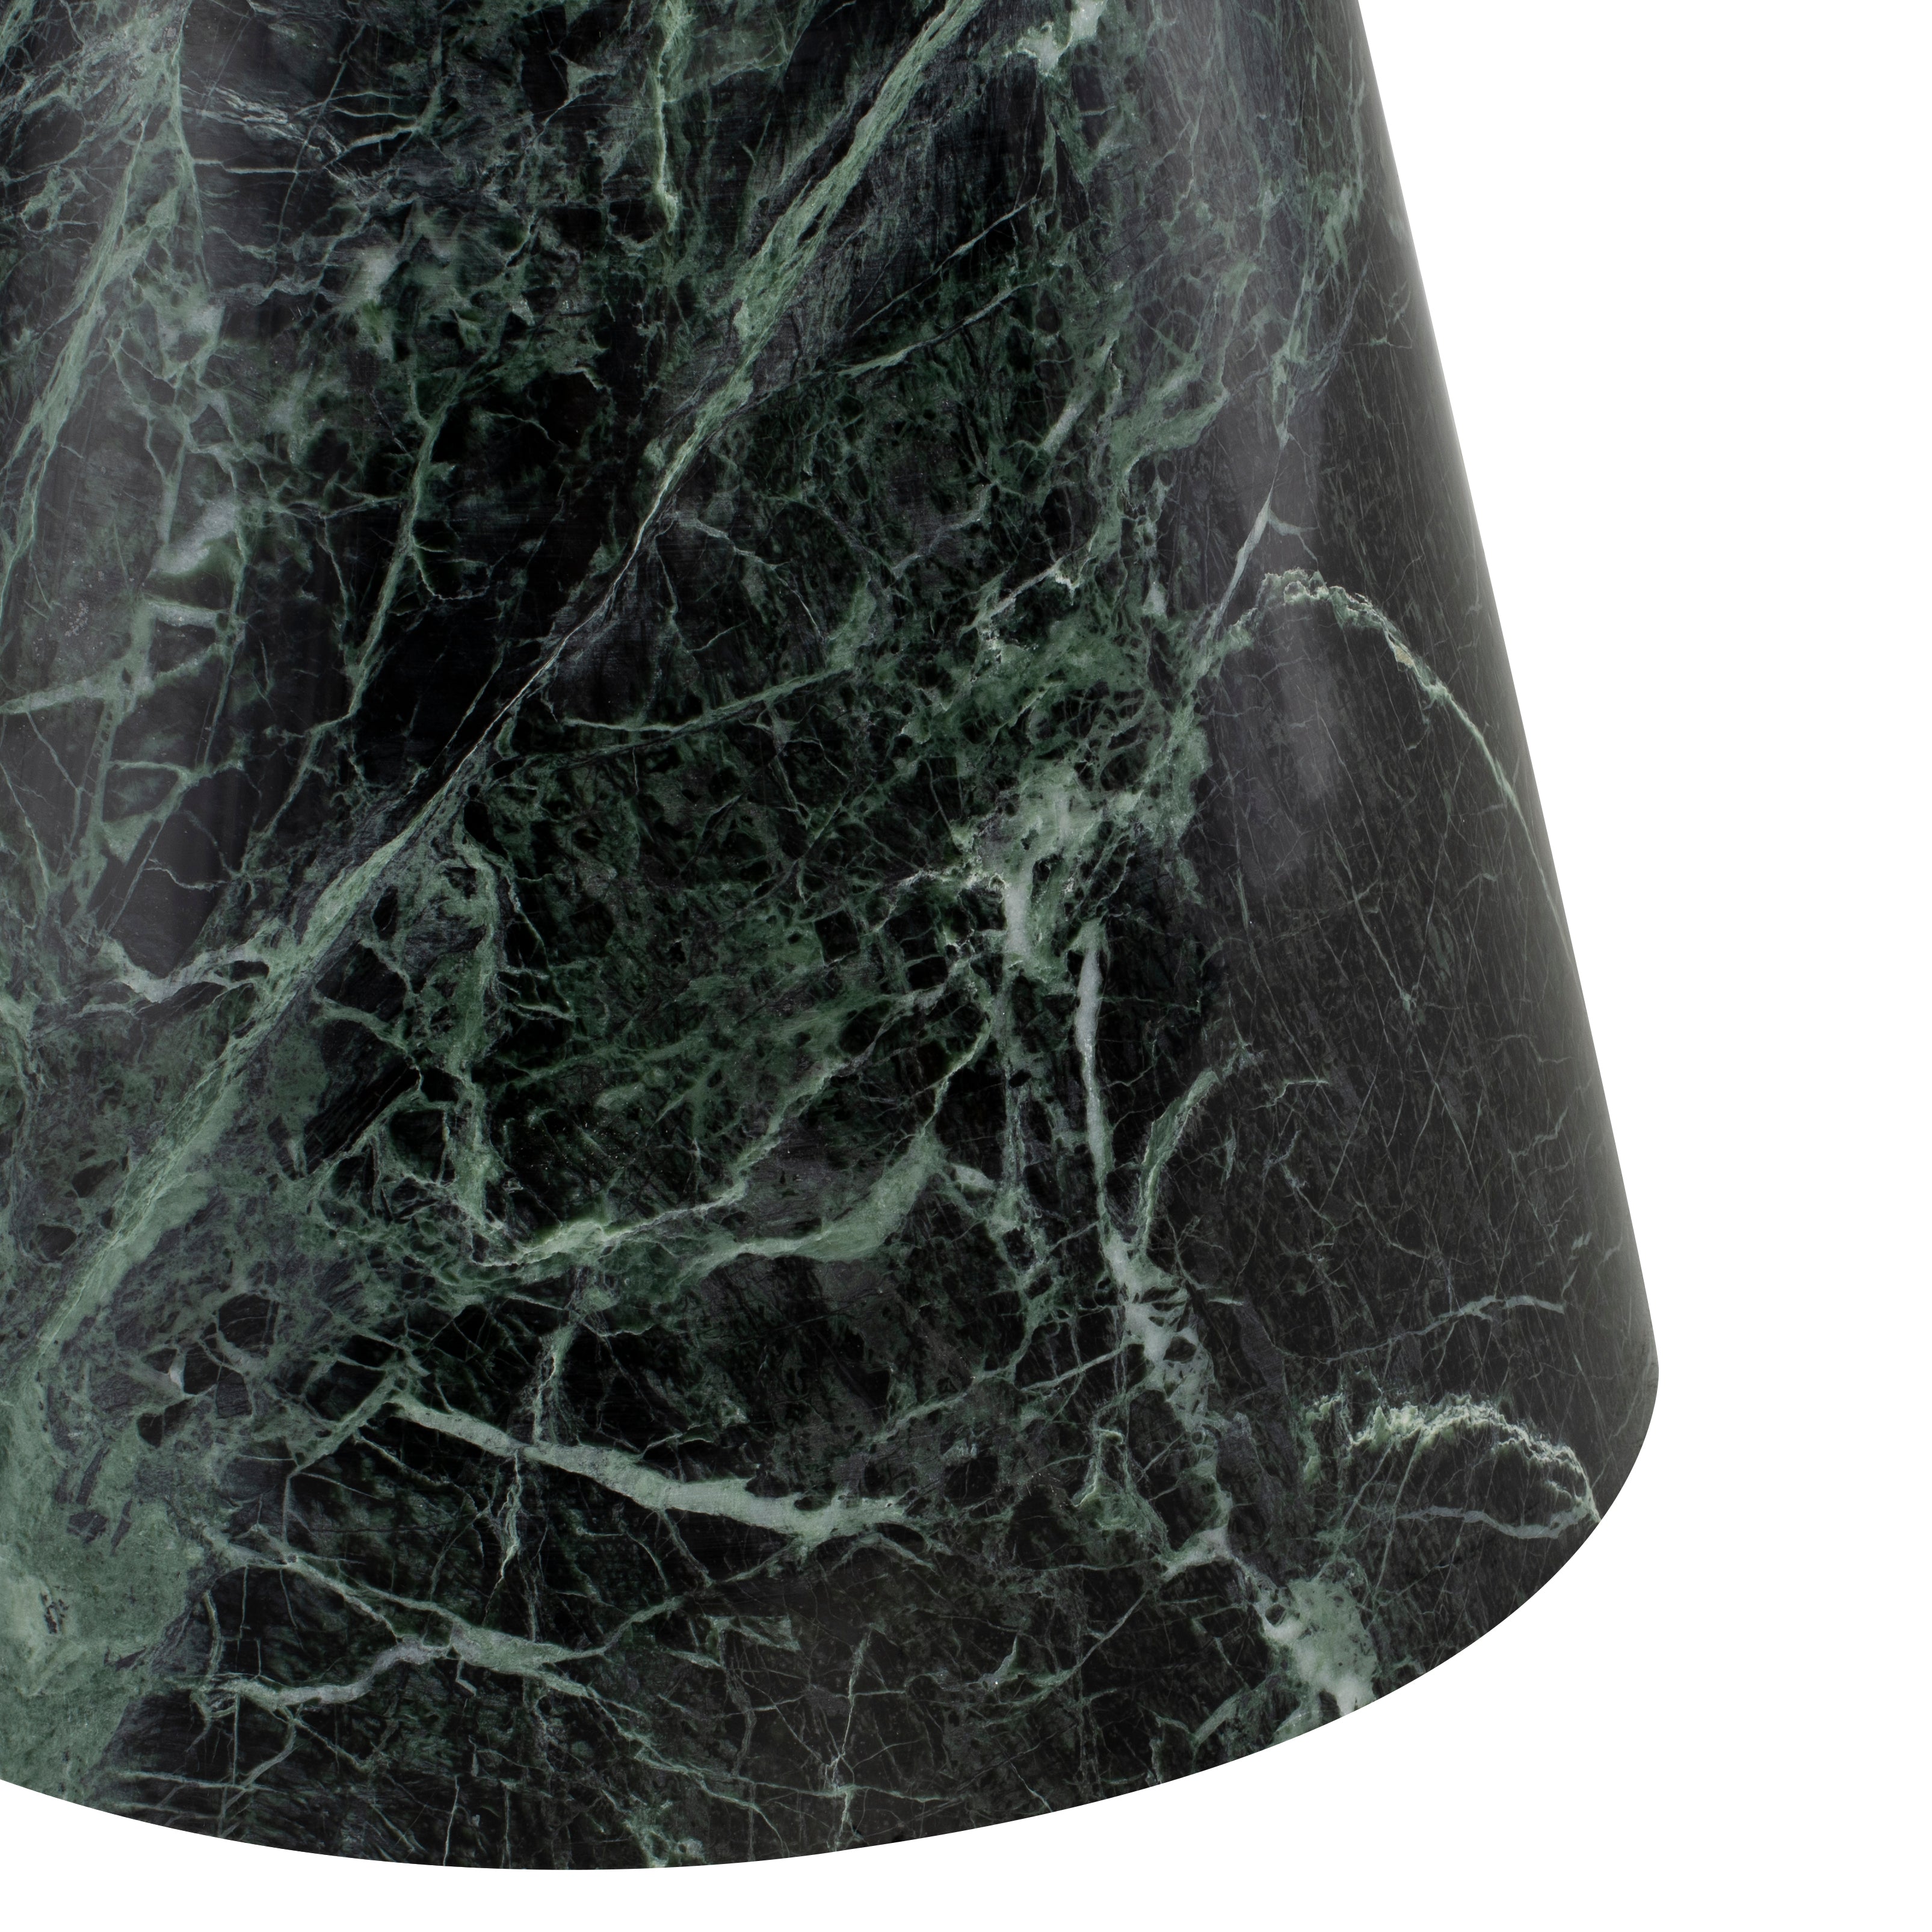 Pietro Green Marble Coffee Table